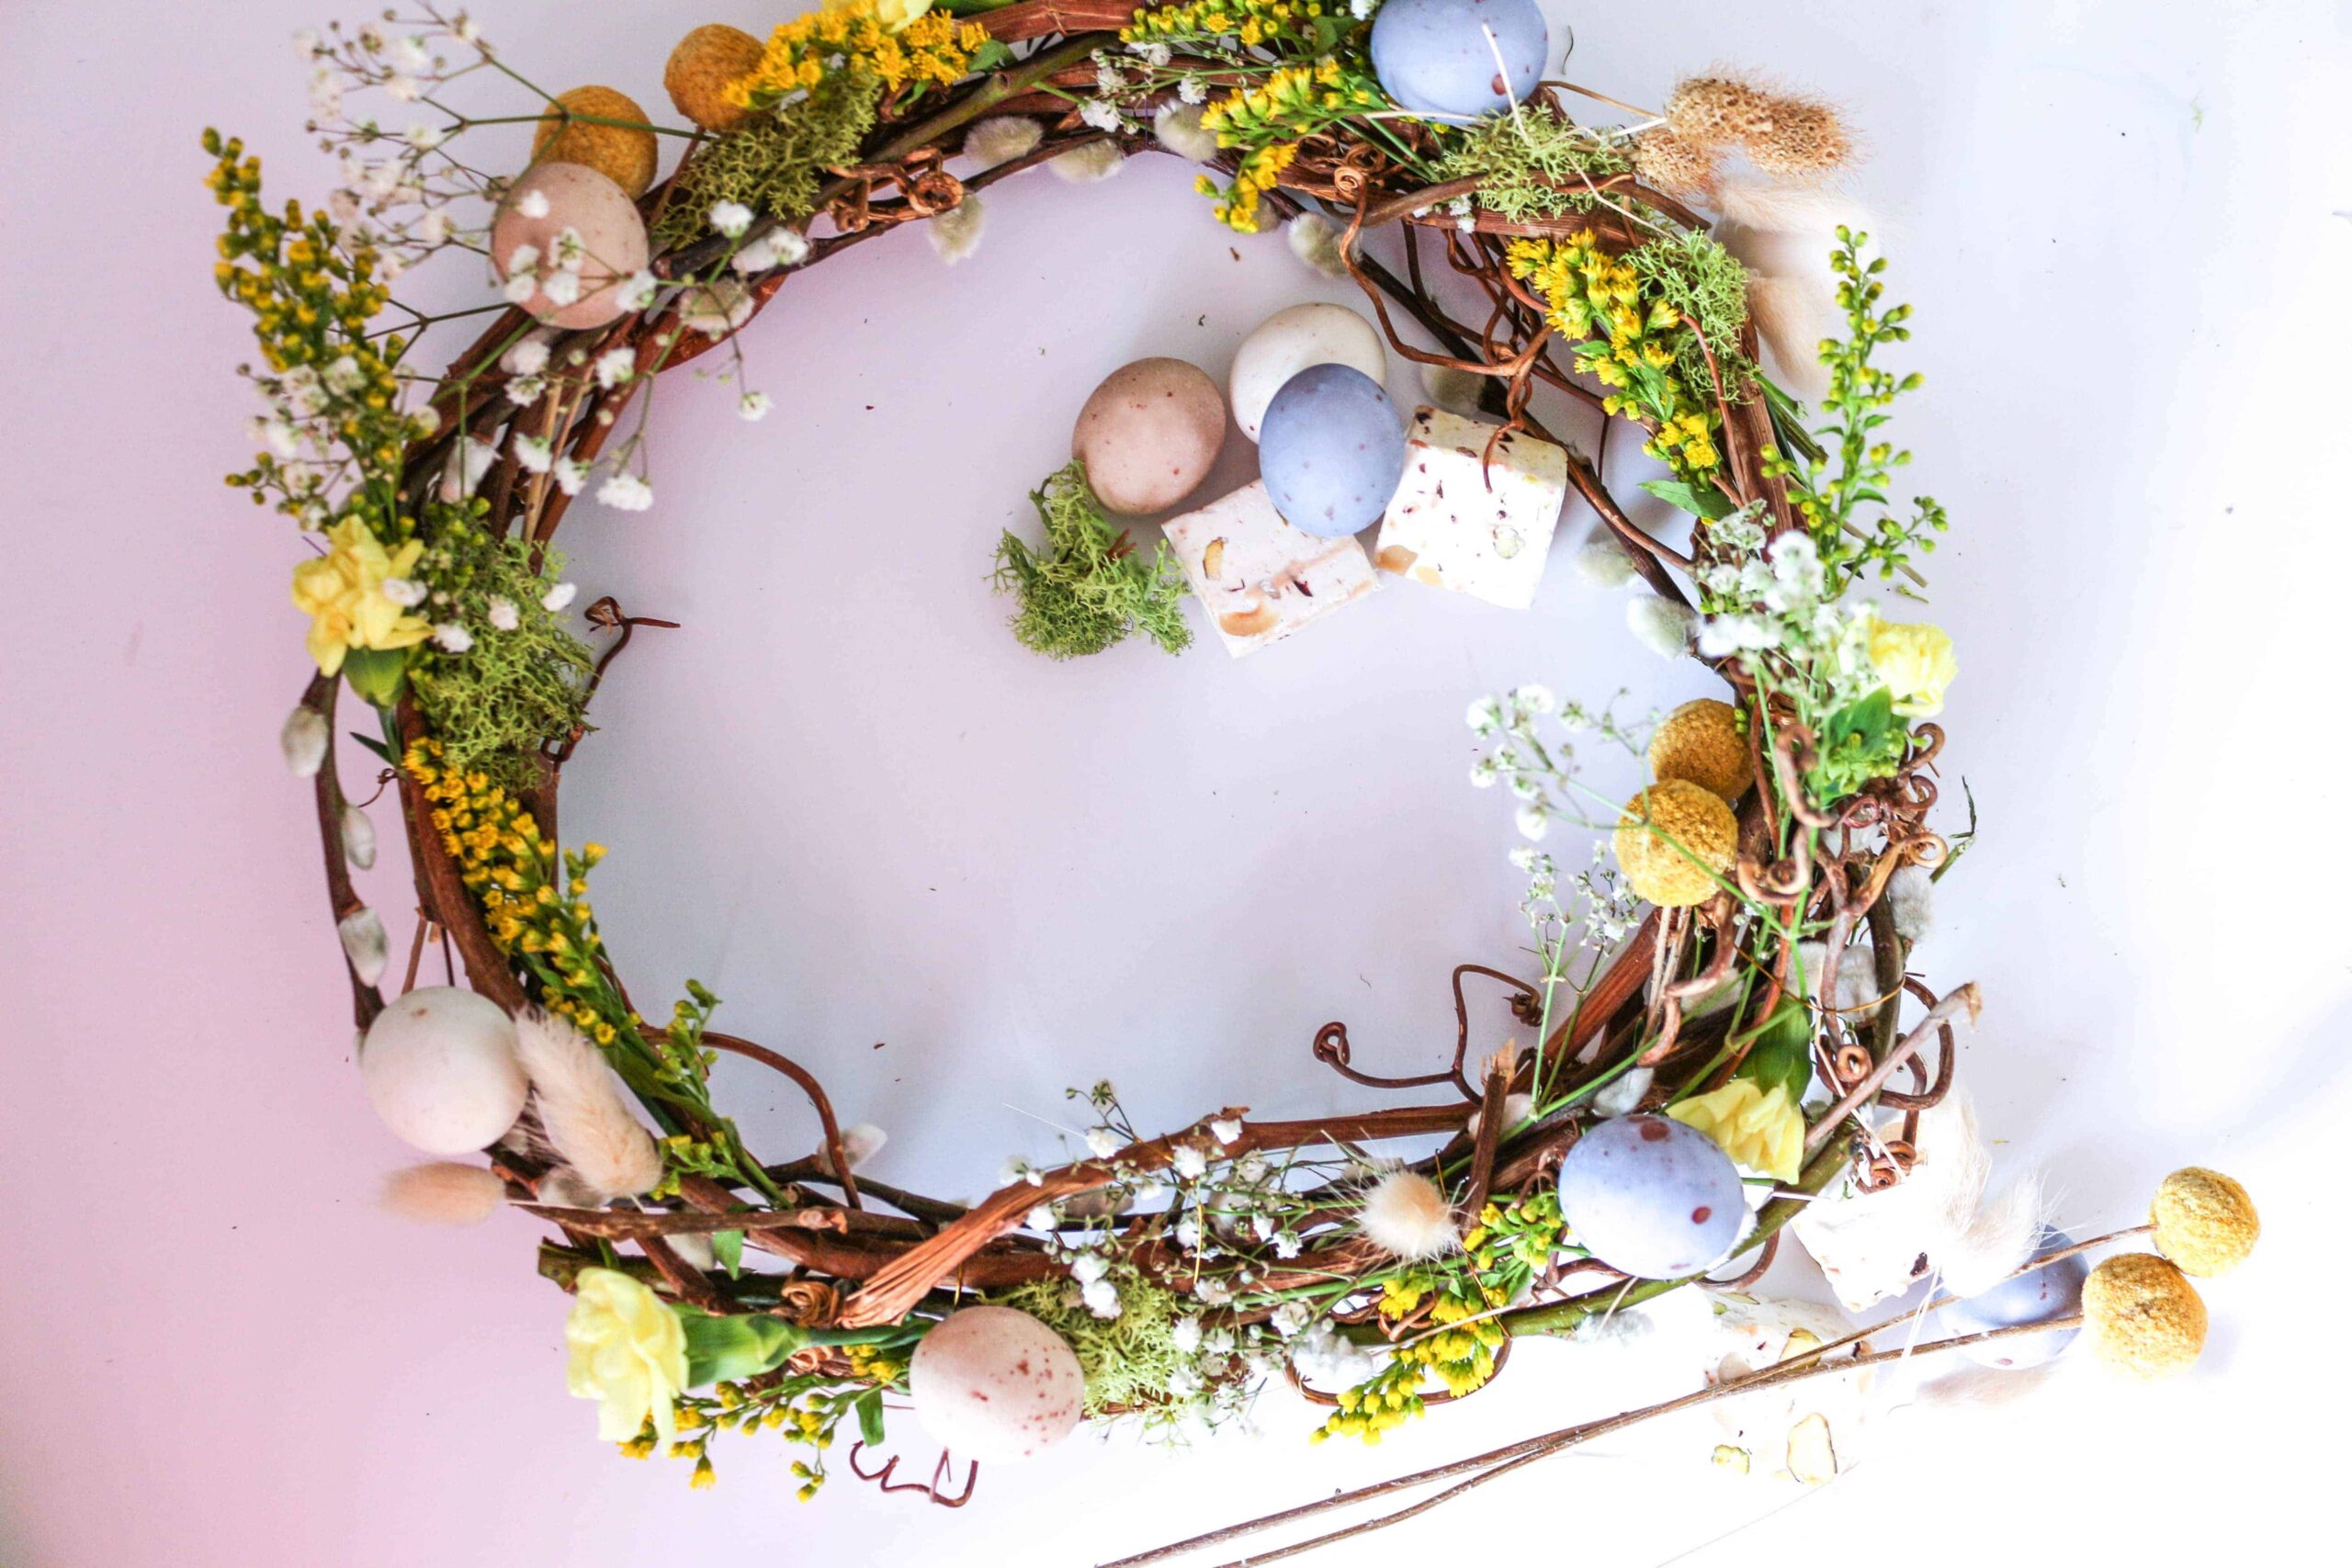 How to Make an Spring Easter Wreath